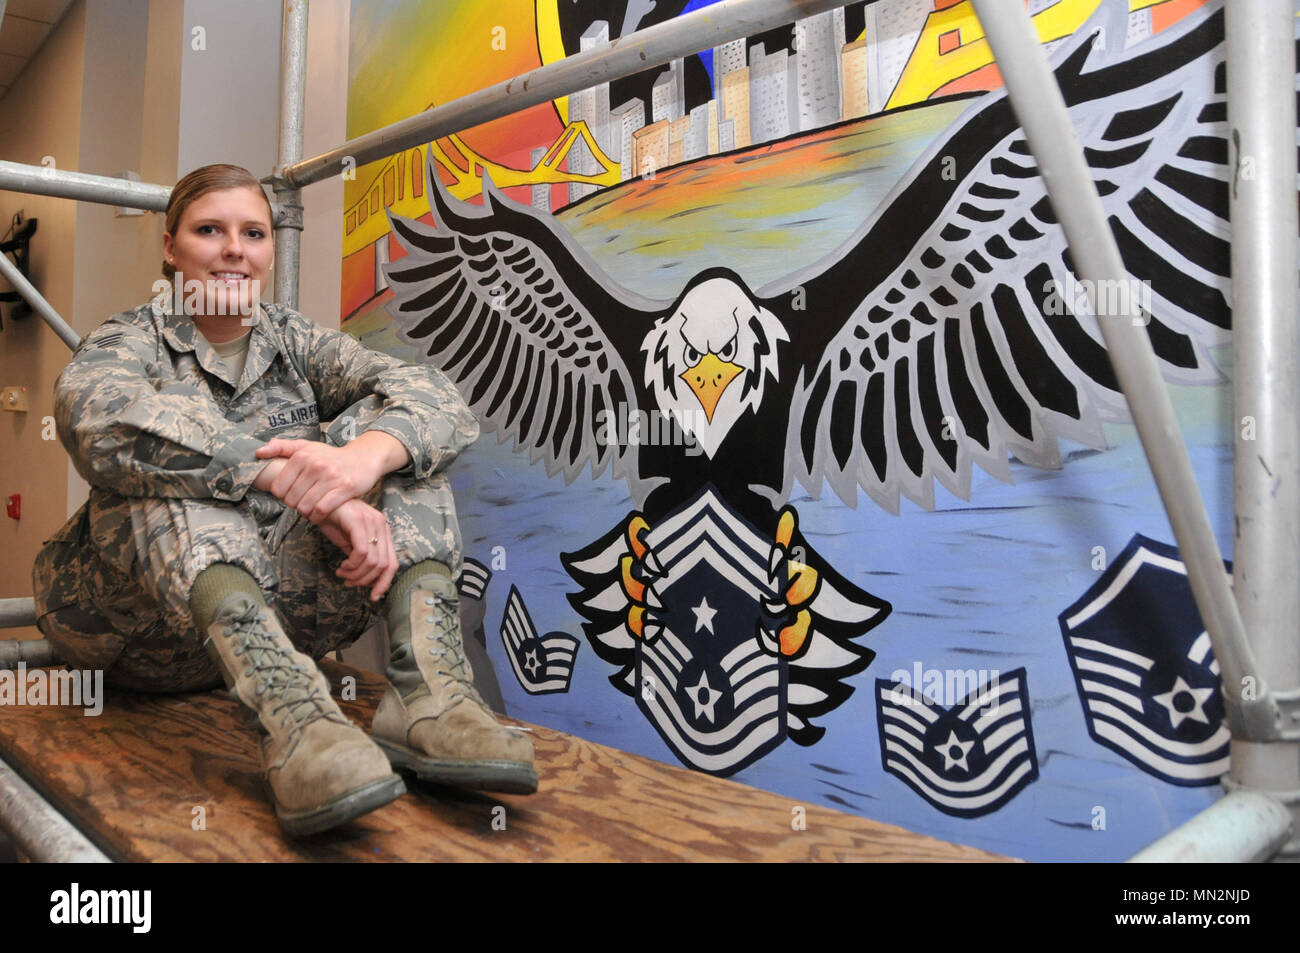 Senior Airman Kayla R. Stapf, a member of the 171st Air Refueling Wing Force Support Squadron, poses beside the mural that she both designed and painted in the dining facility at the 171st Air Refueling Wing, Pittsburgh Pennsylvania, Aug. 11, 2017. (U.S. Air National Guard photo by Staff Sgt. Ryan A. Conley) Stock Photo